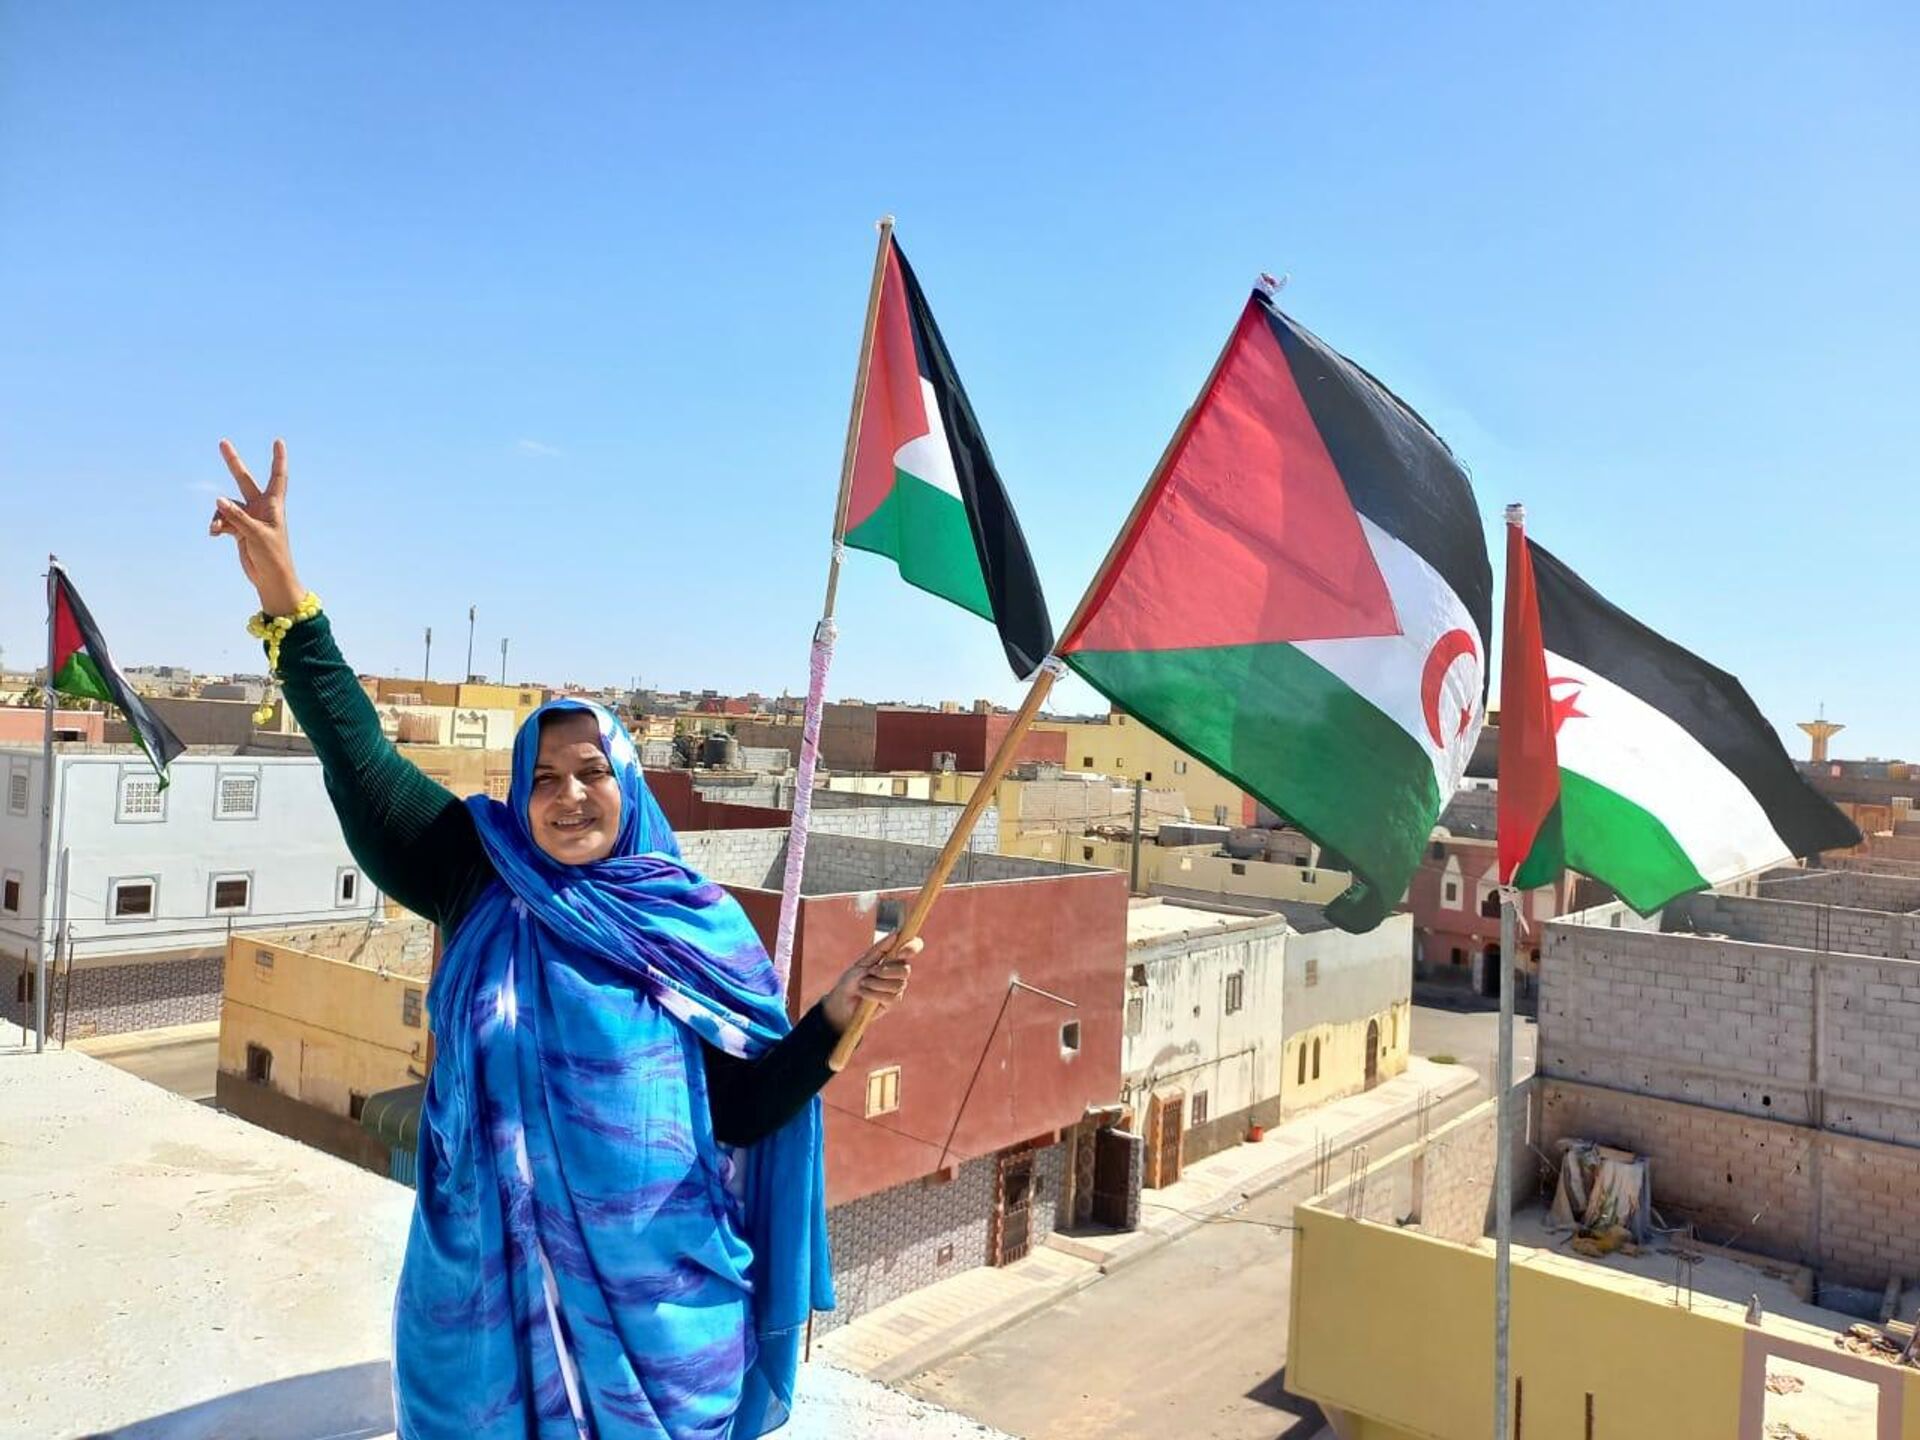 Sultana Khayya, President of the Sahrawi Association for the Defense of Human Rights and the Protection of Natural Resources, on the roof of her home in Boujdour, Western Sahara, where she has been under house arrest since November 2020. - Sputnik International, 1920, 25.10.2021